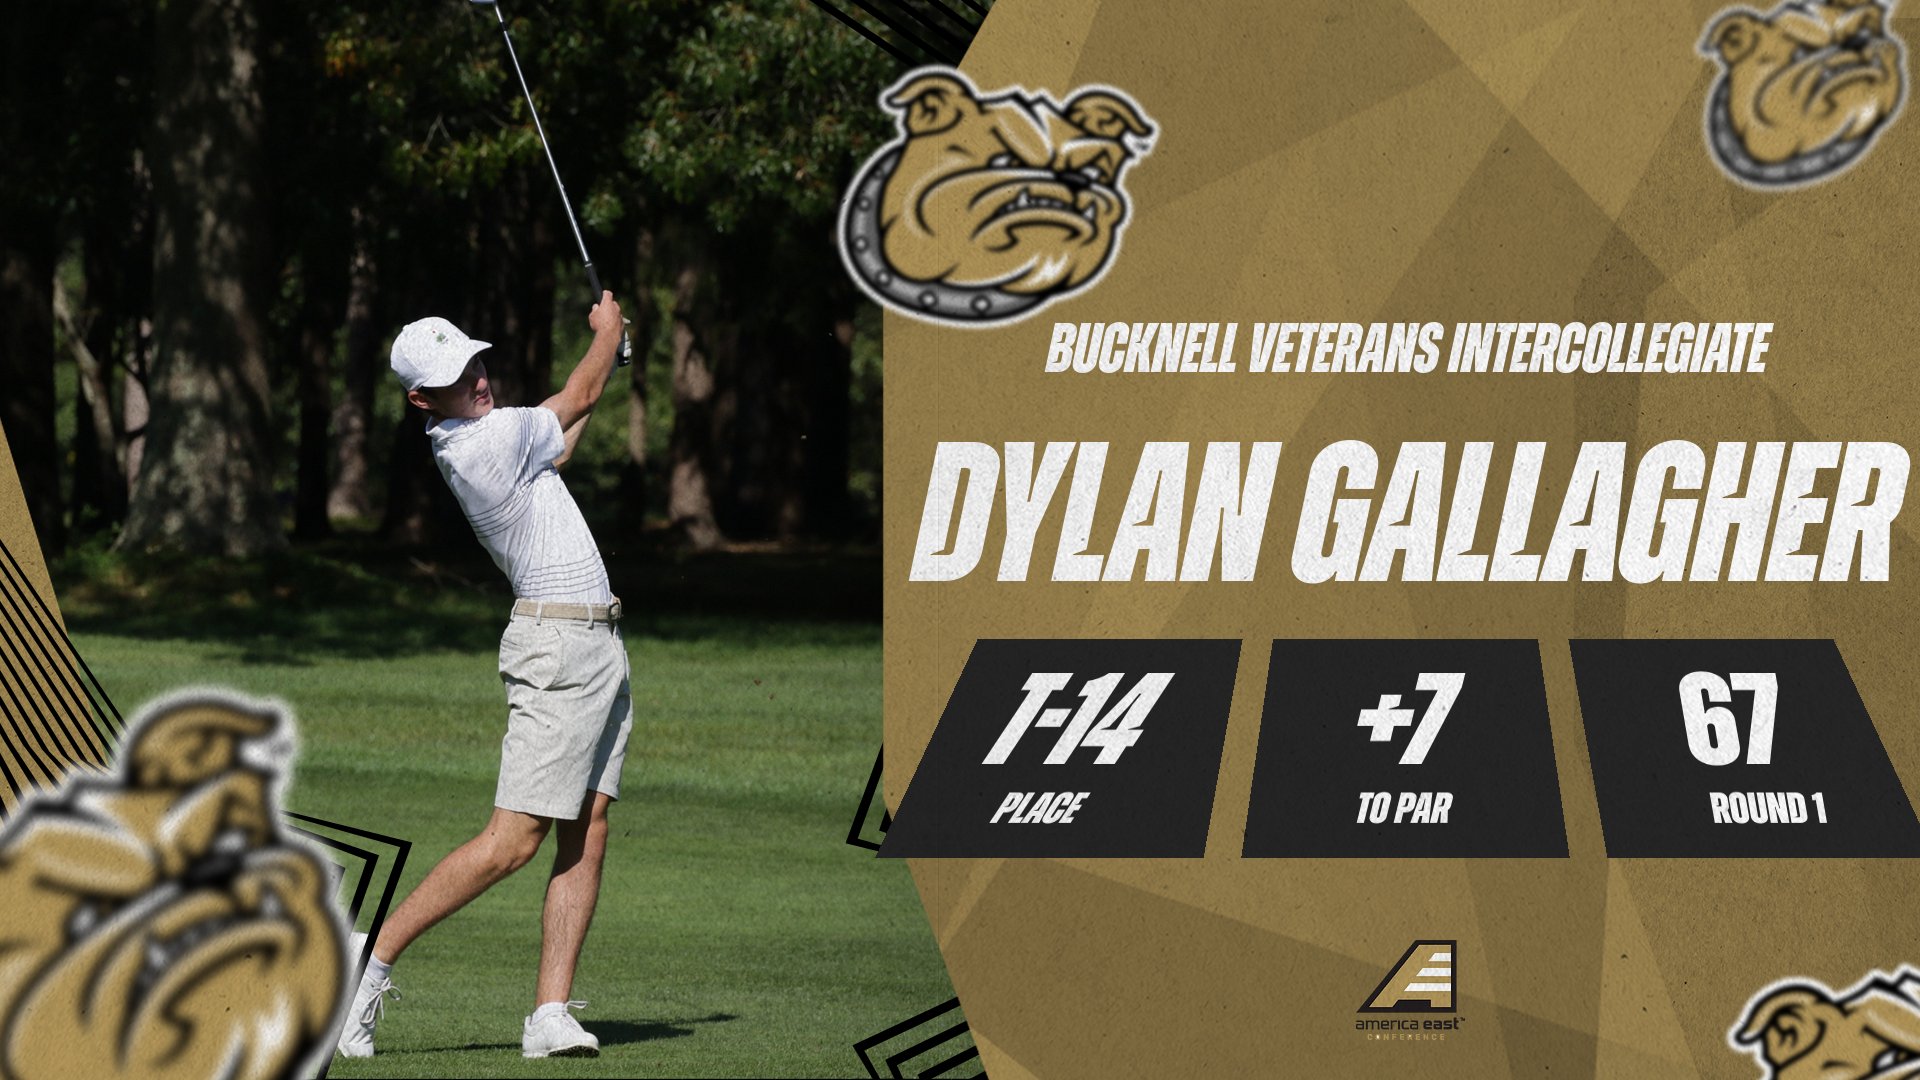 Gallagher closes out Bulldogs fall season with Top 15 Finish at Bucknell Veterans Intercollegiate